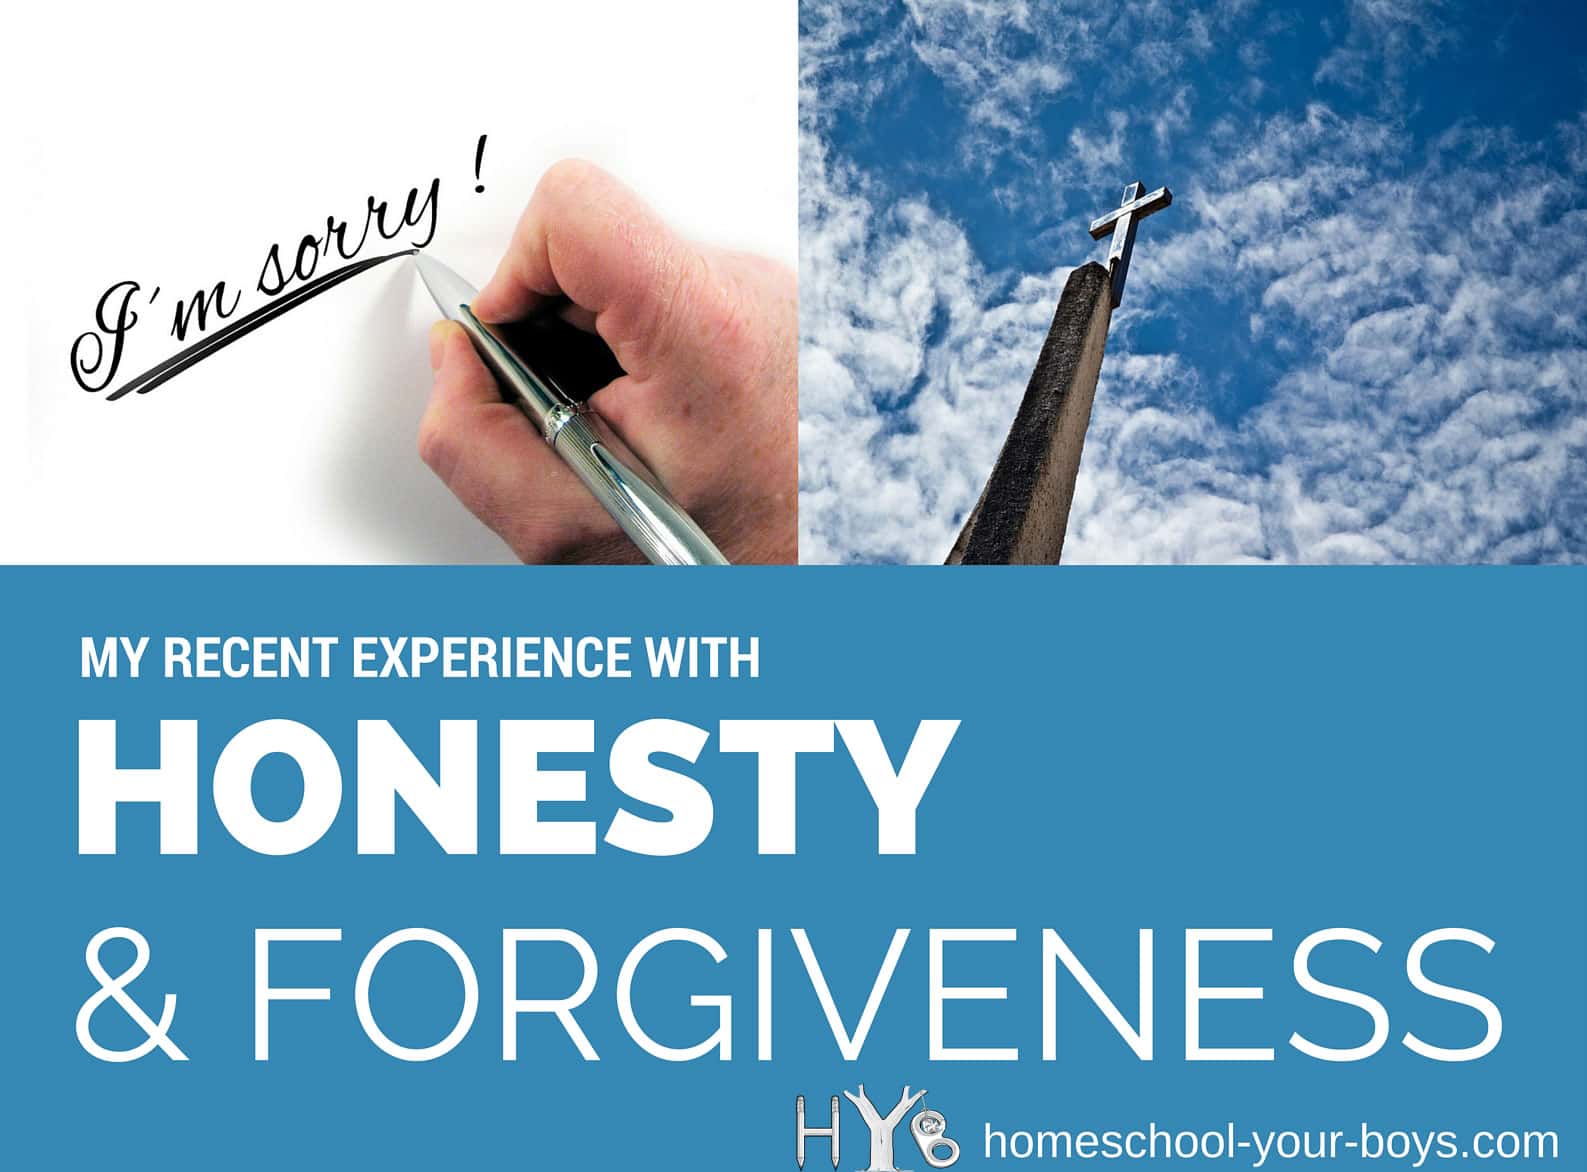 My recent experience with honesty and forgiveness